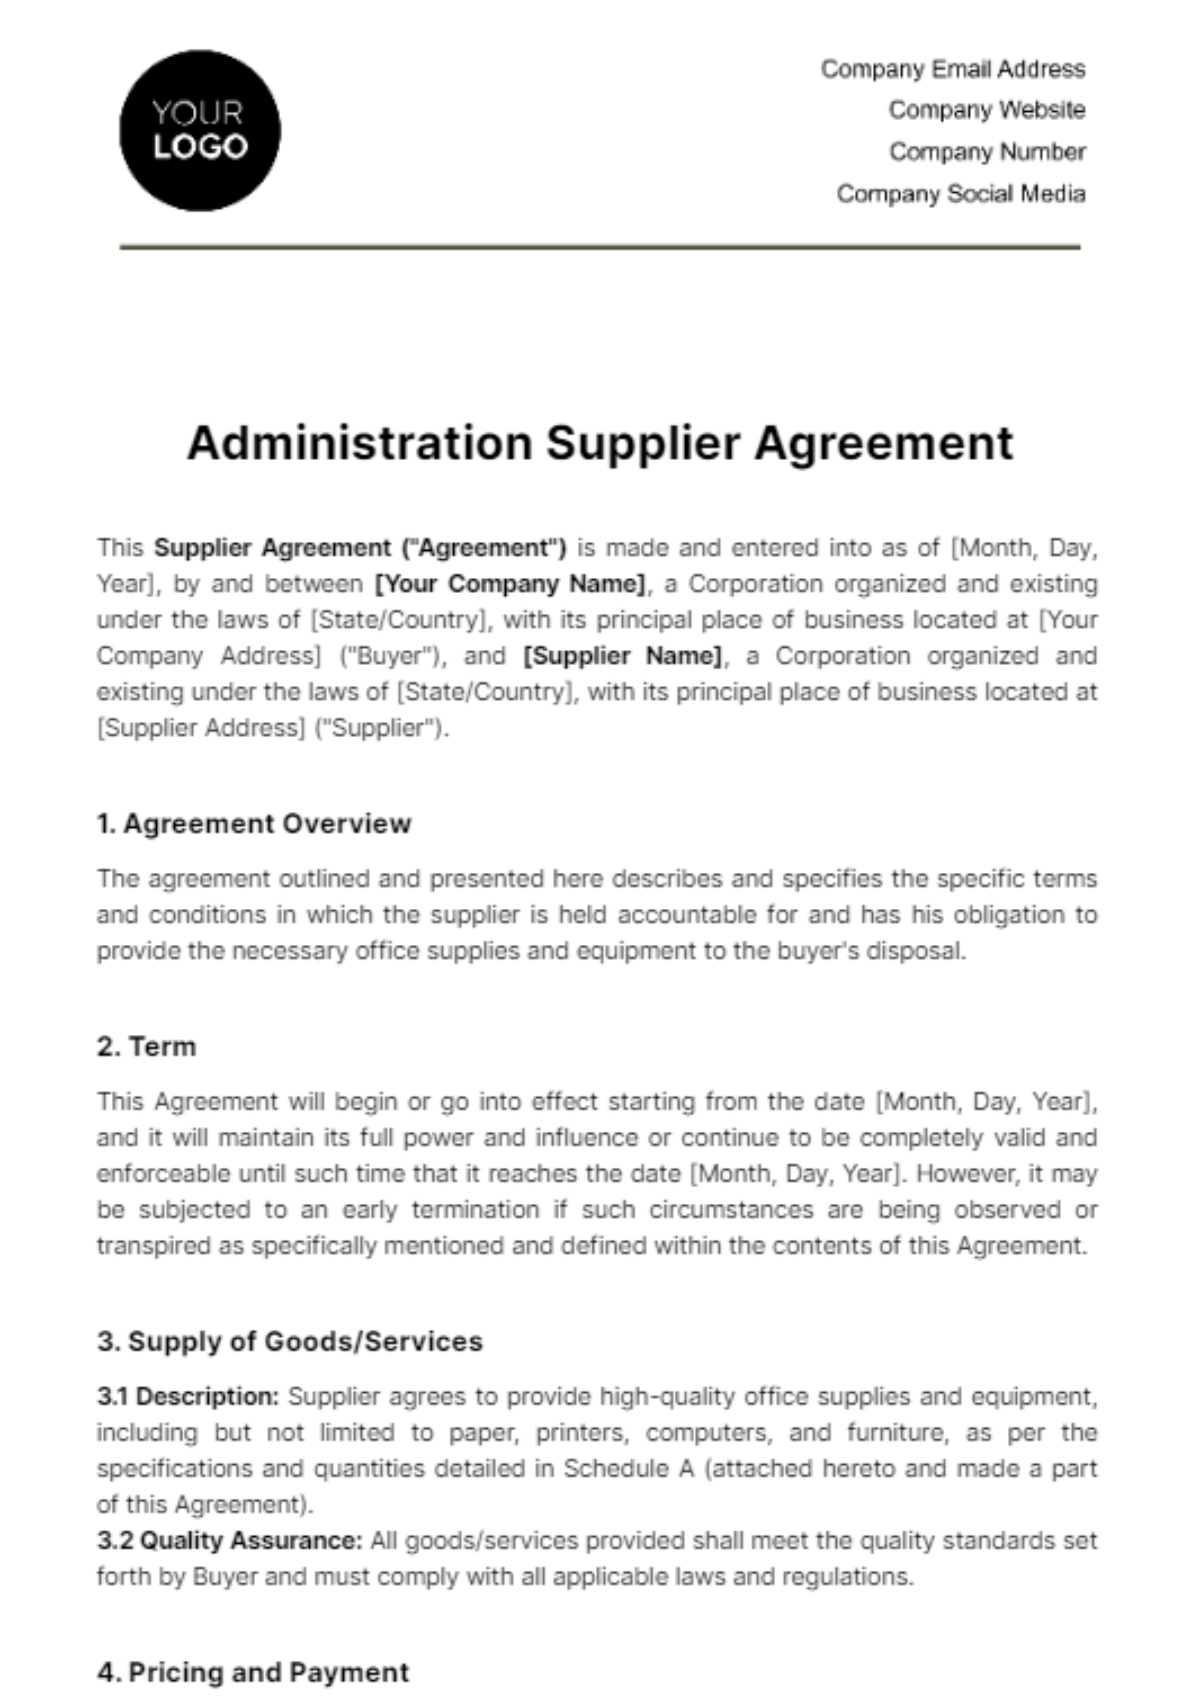 Administration Supplier Agreement Template